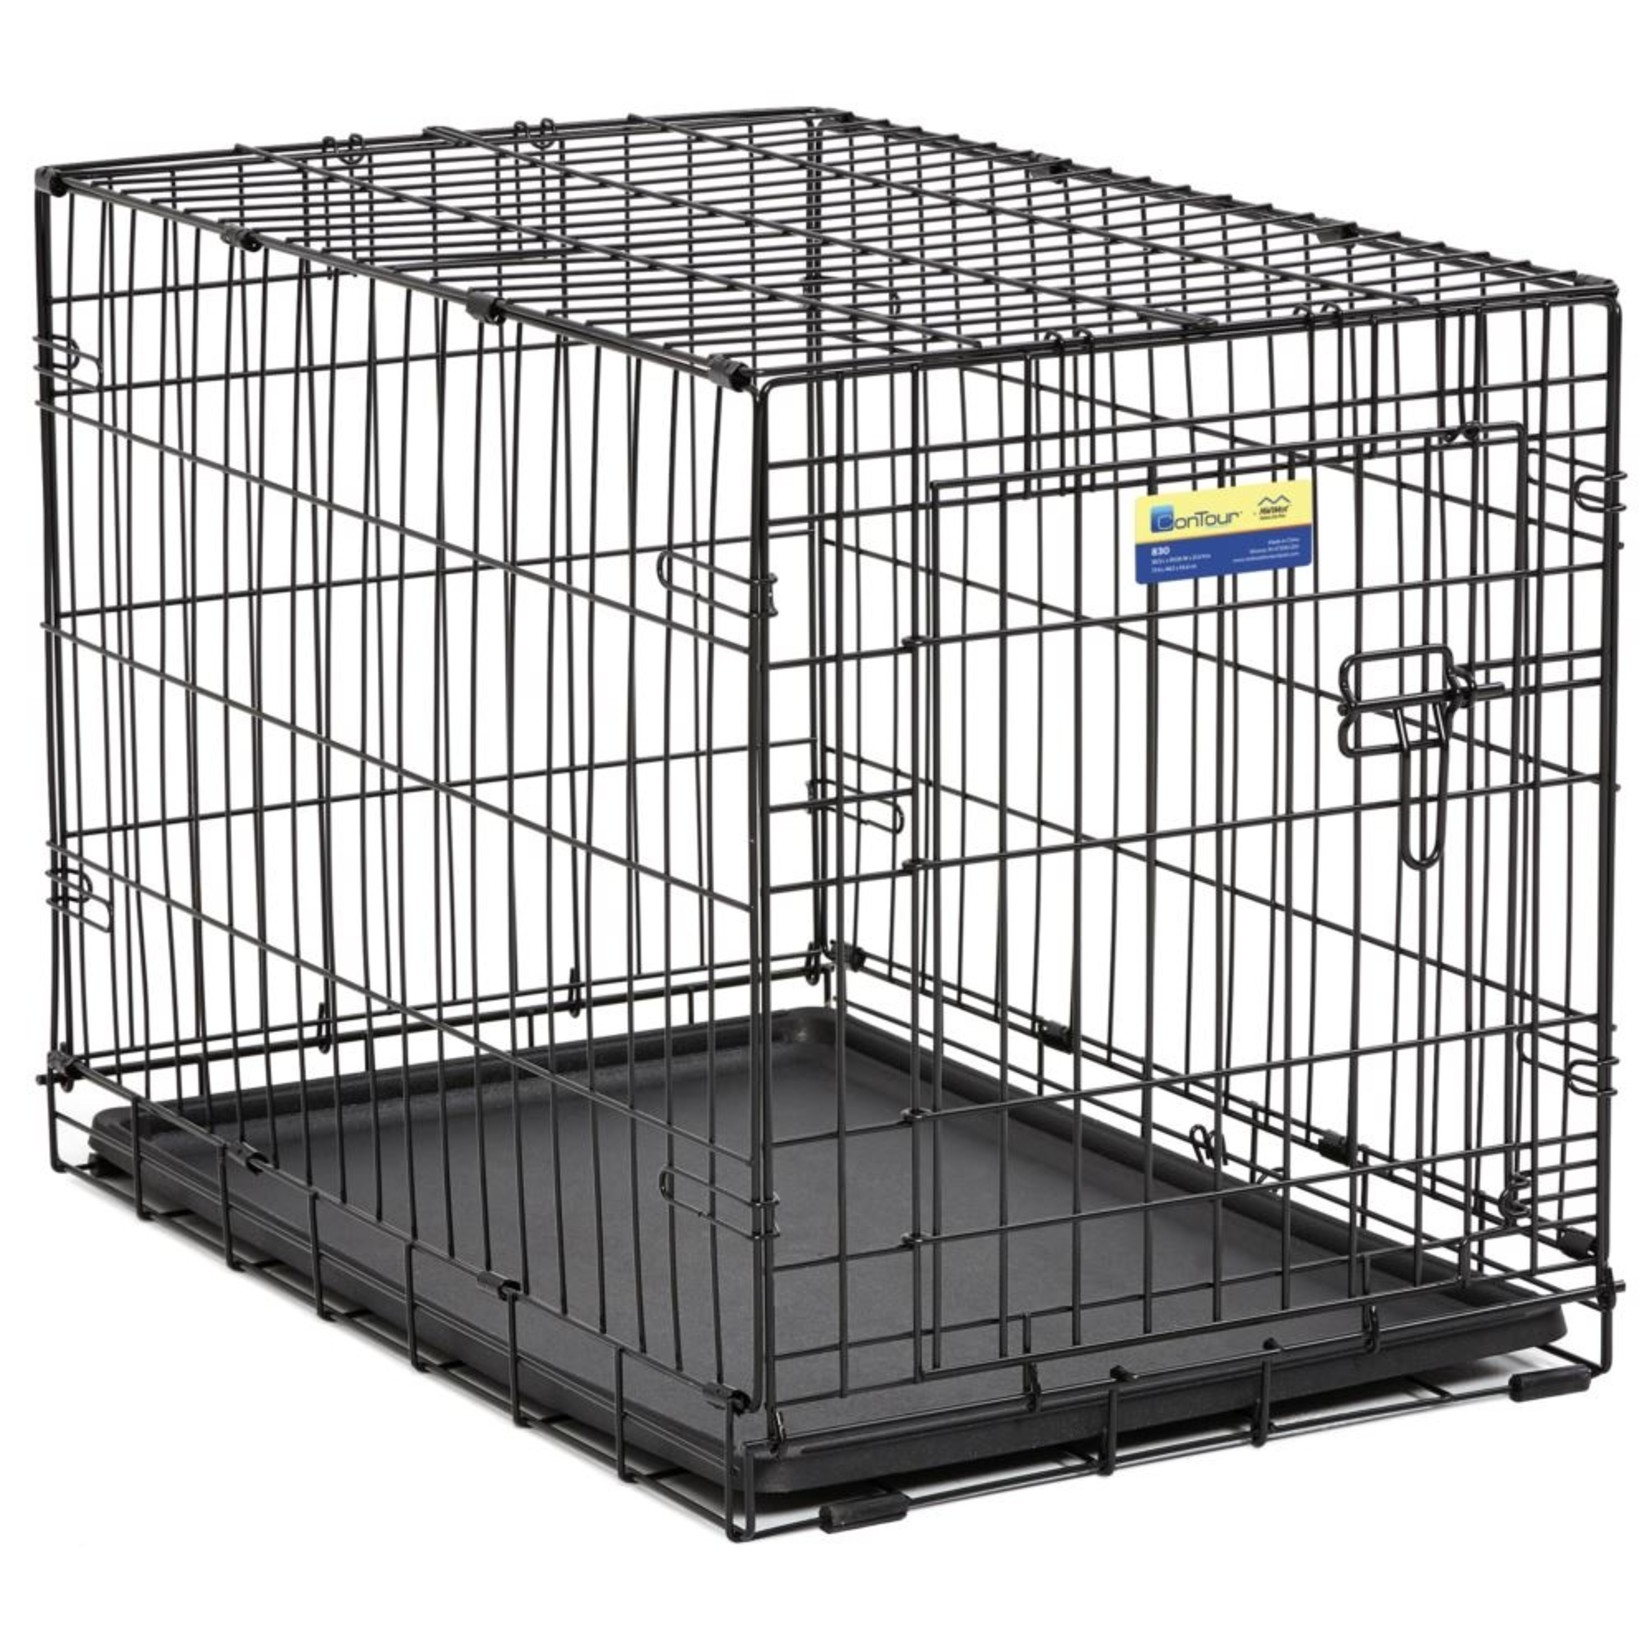 Midwest Homes for Pets Midwest Homes for Pets Contour Dog Crate 30in